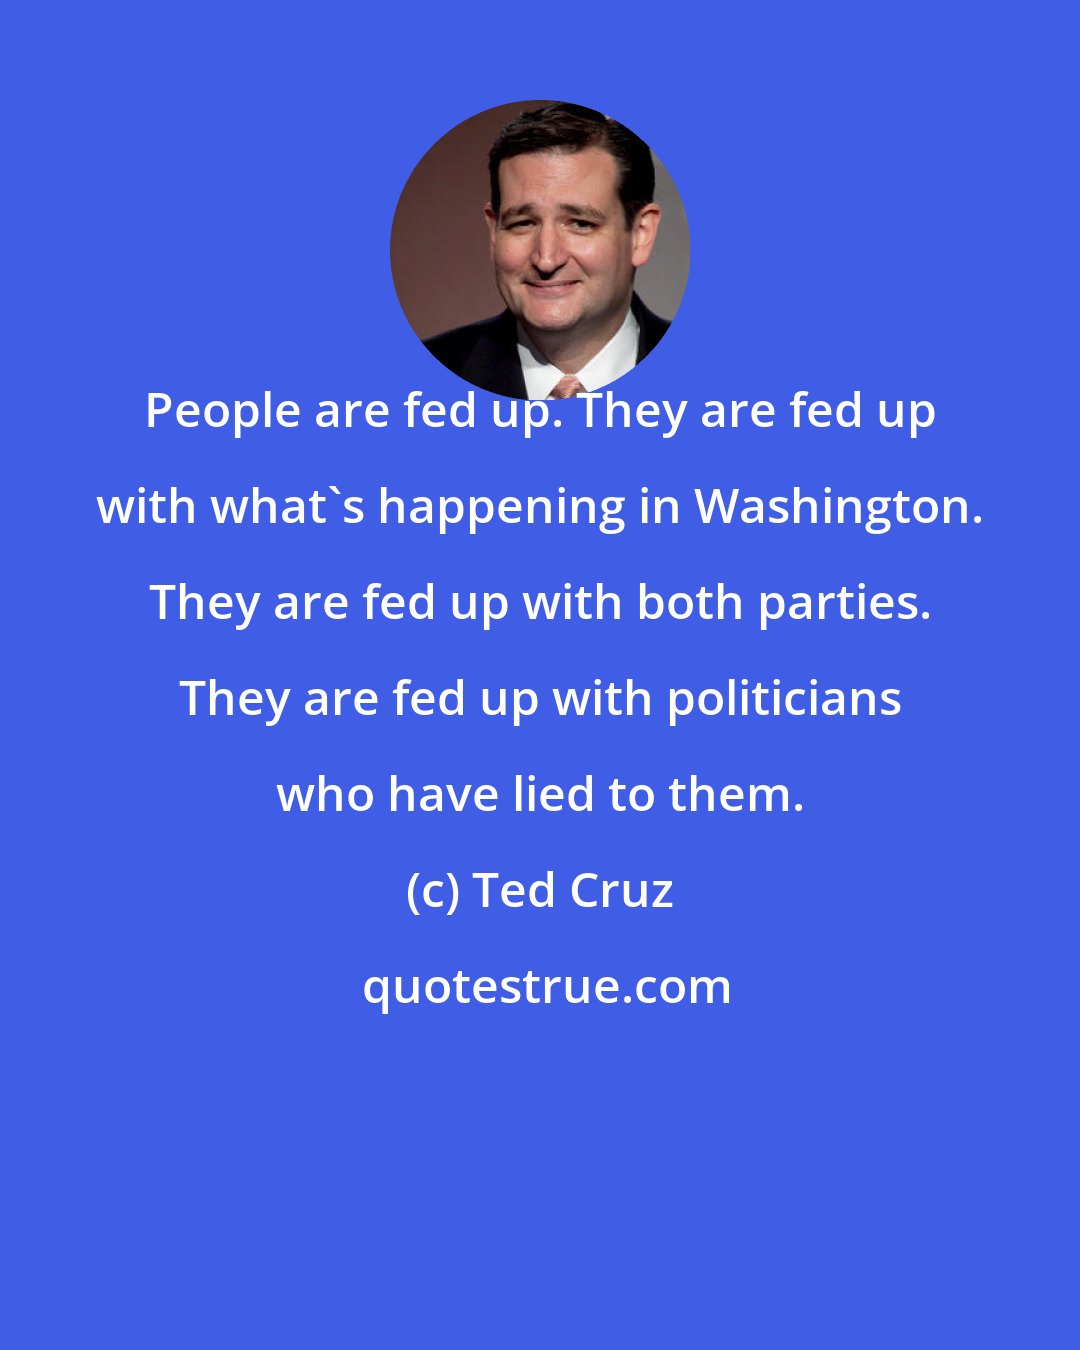 Ted Cruz: People are fed up. They are fed up with what's happening in Washington. They are fed up with both parties. They are fed up with politicians who have lied to them.